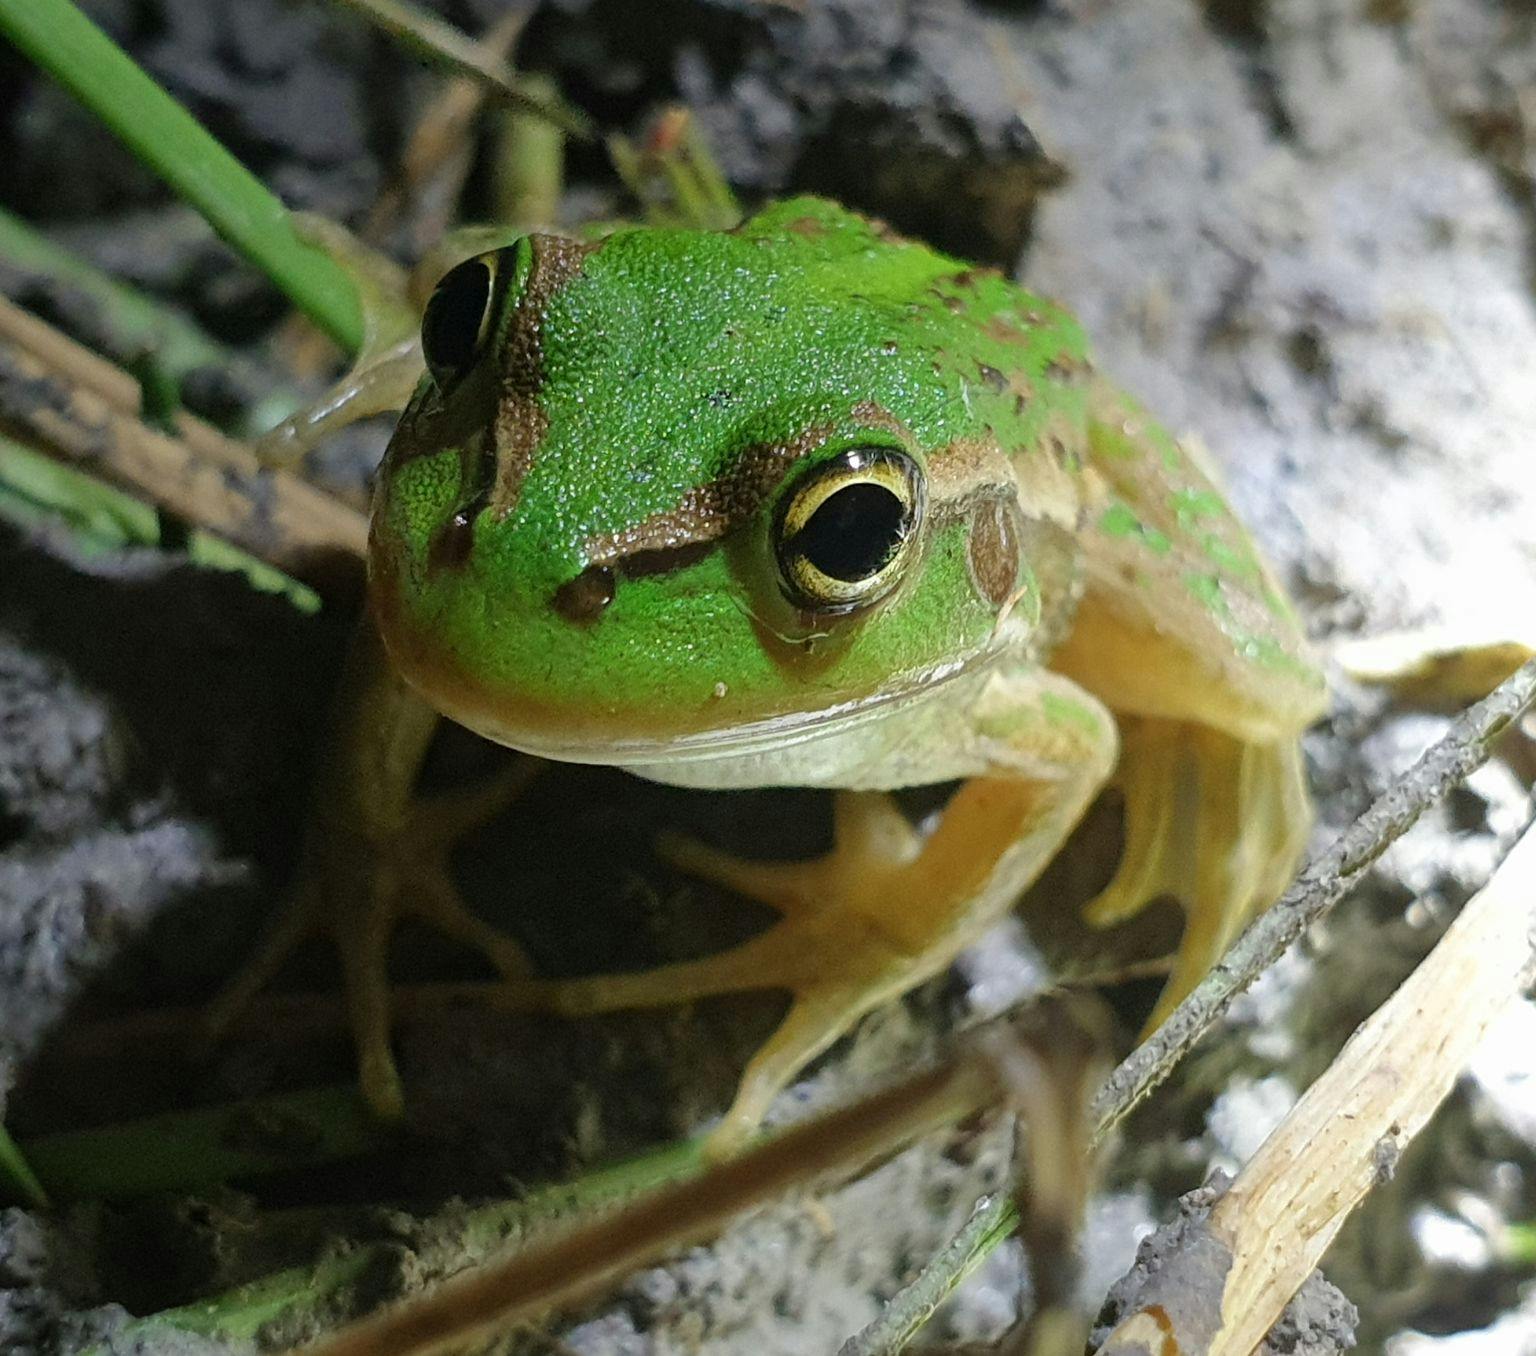 Close-up image of a green frog.